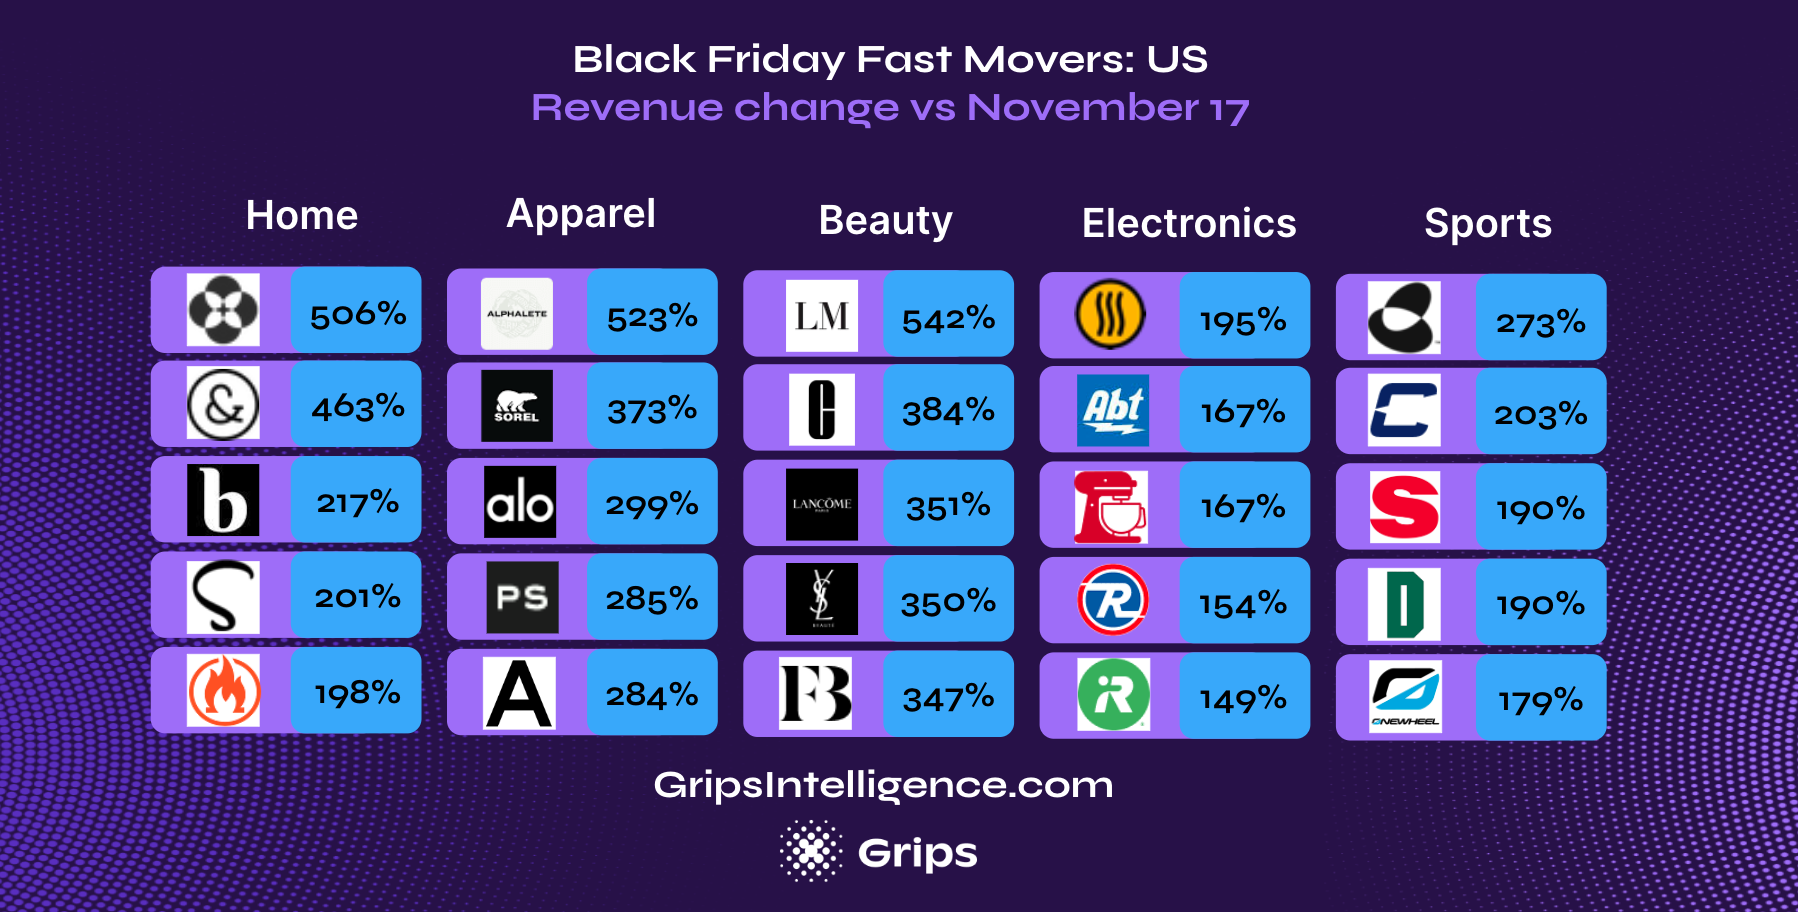 Fast moving US e-commerce sites Black Friday